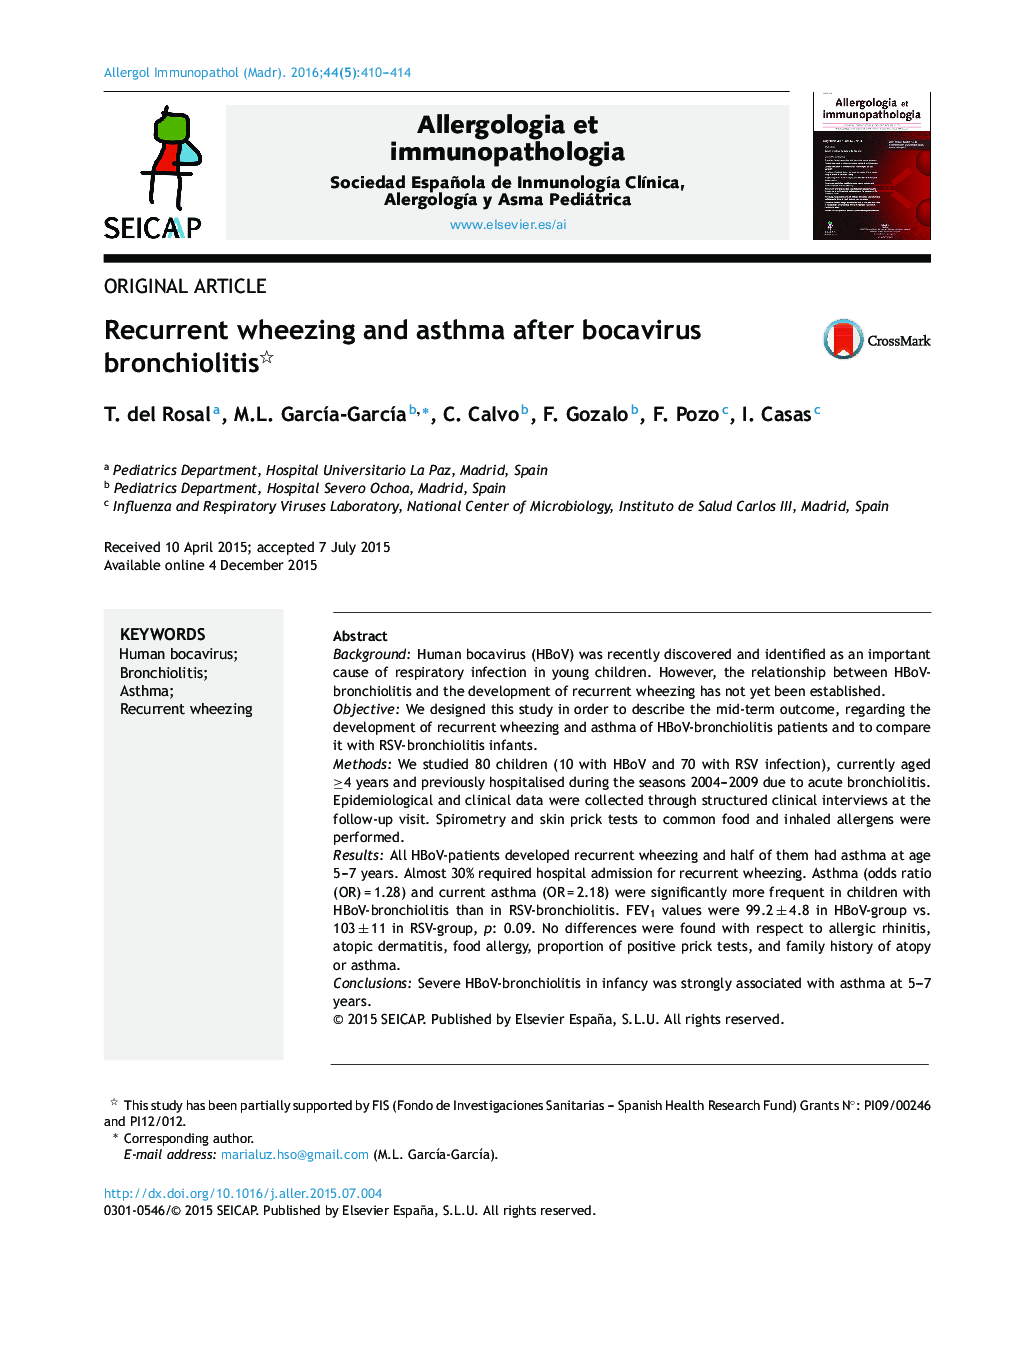 Recurrent wheezing and asthma after bocavirus bronchiolitis 